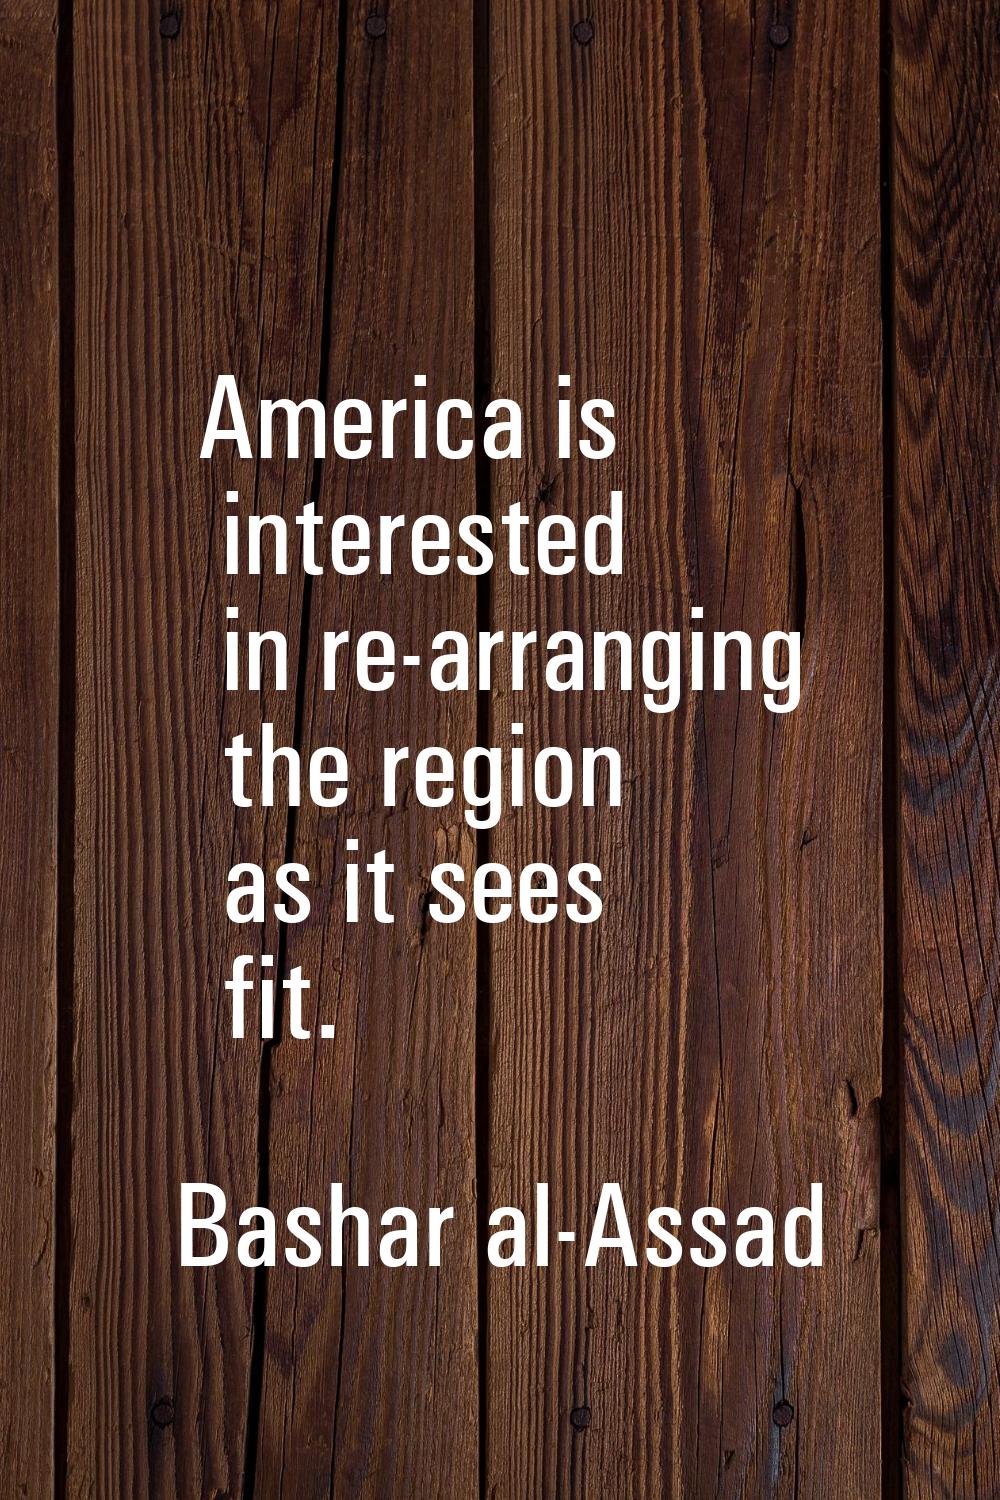 America is interested in re-arranging the region as it sees fit.